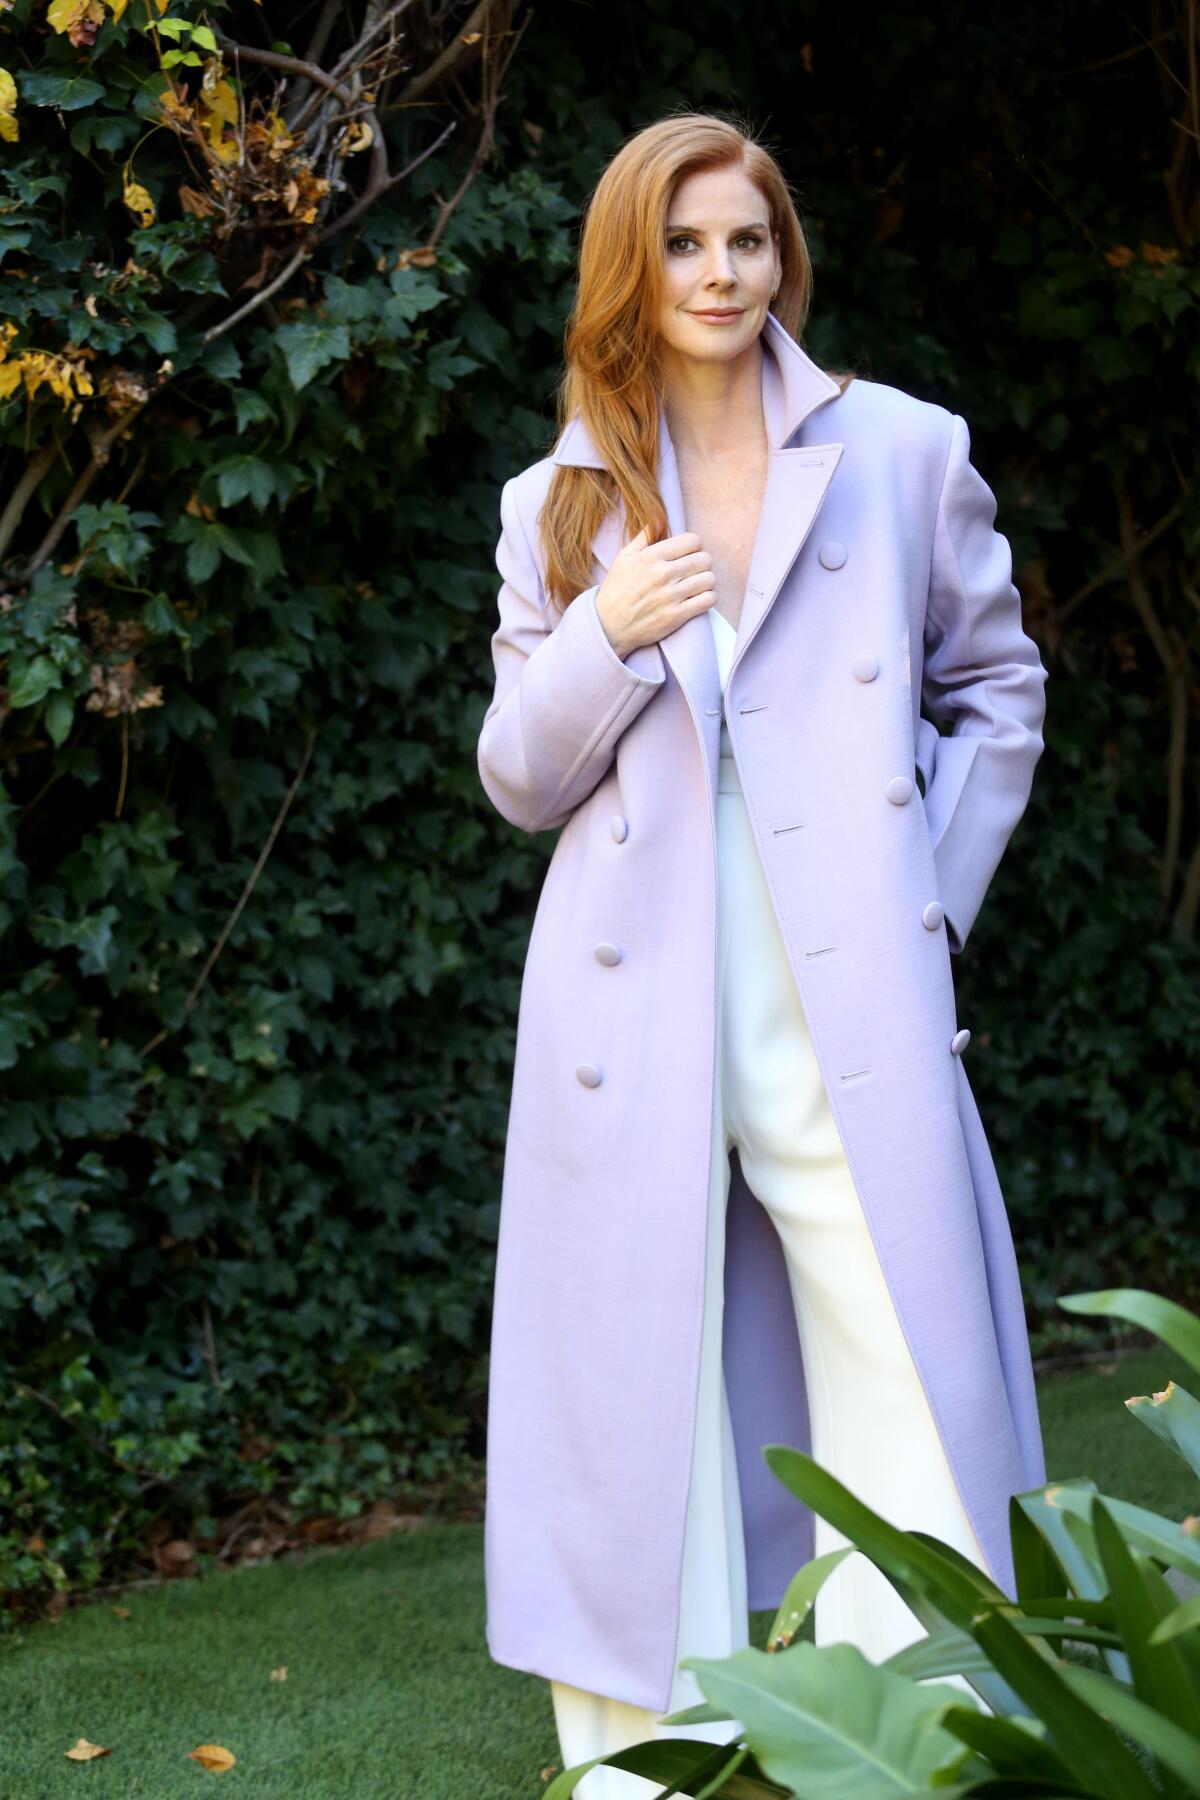 Actor Sarah Rafferty poses in a long lilac coat in her backyard.